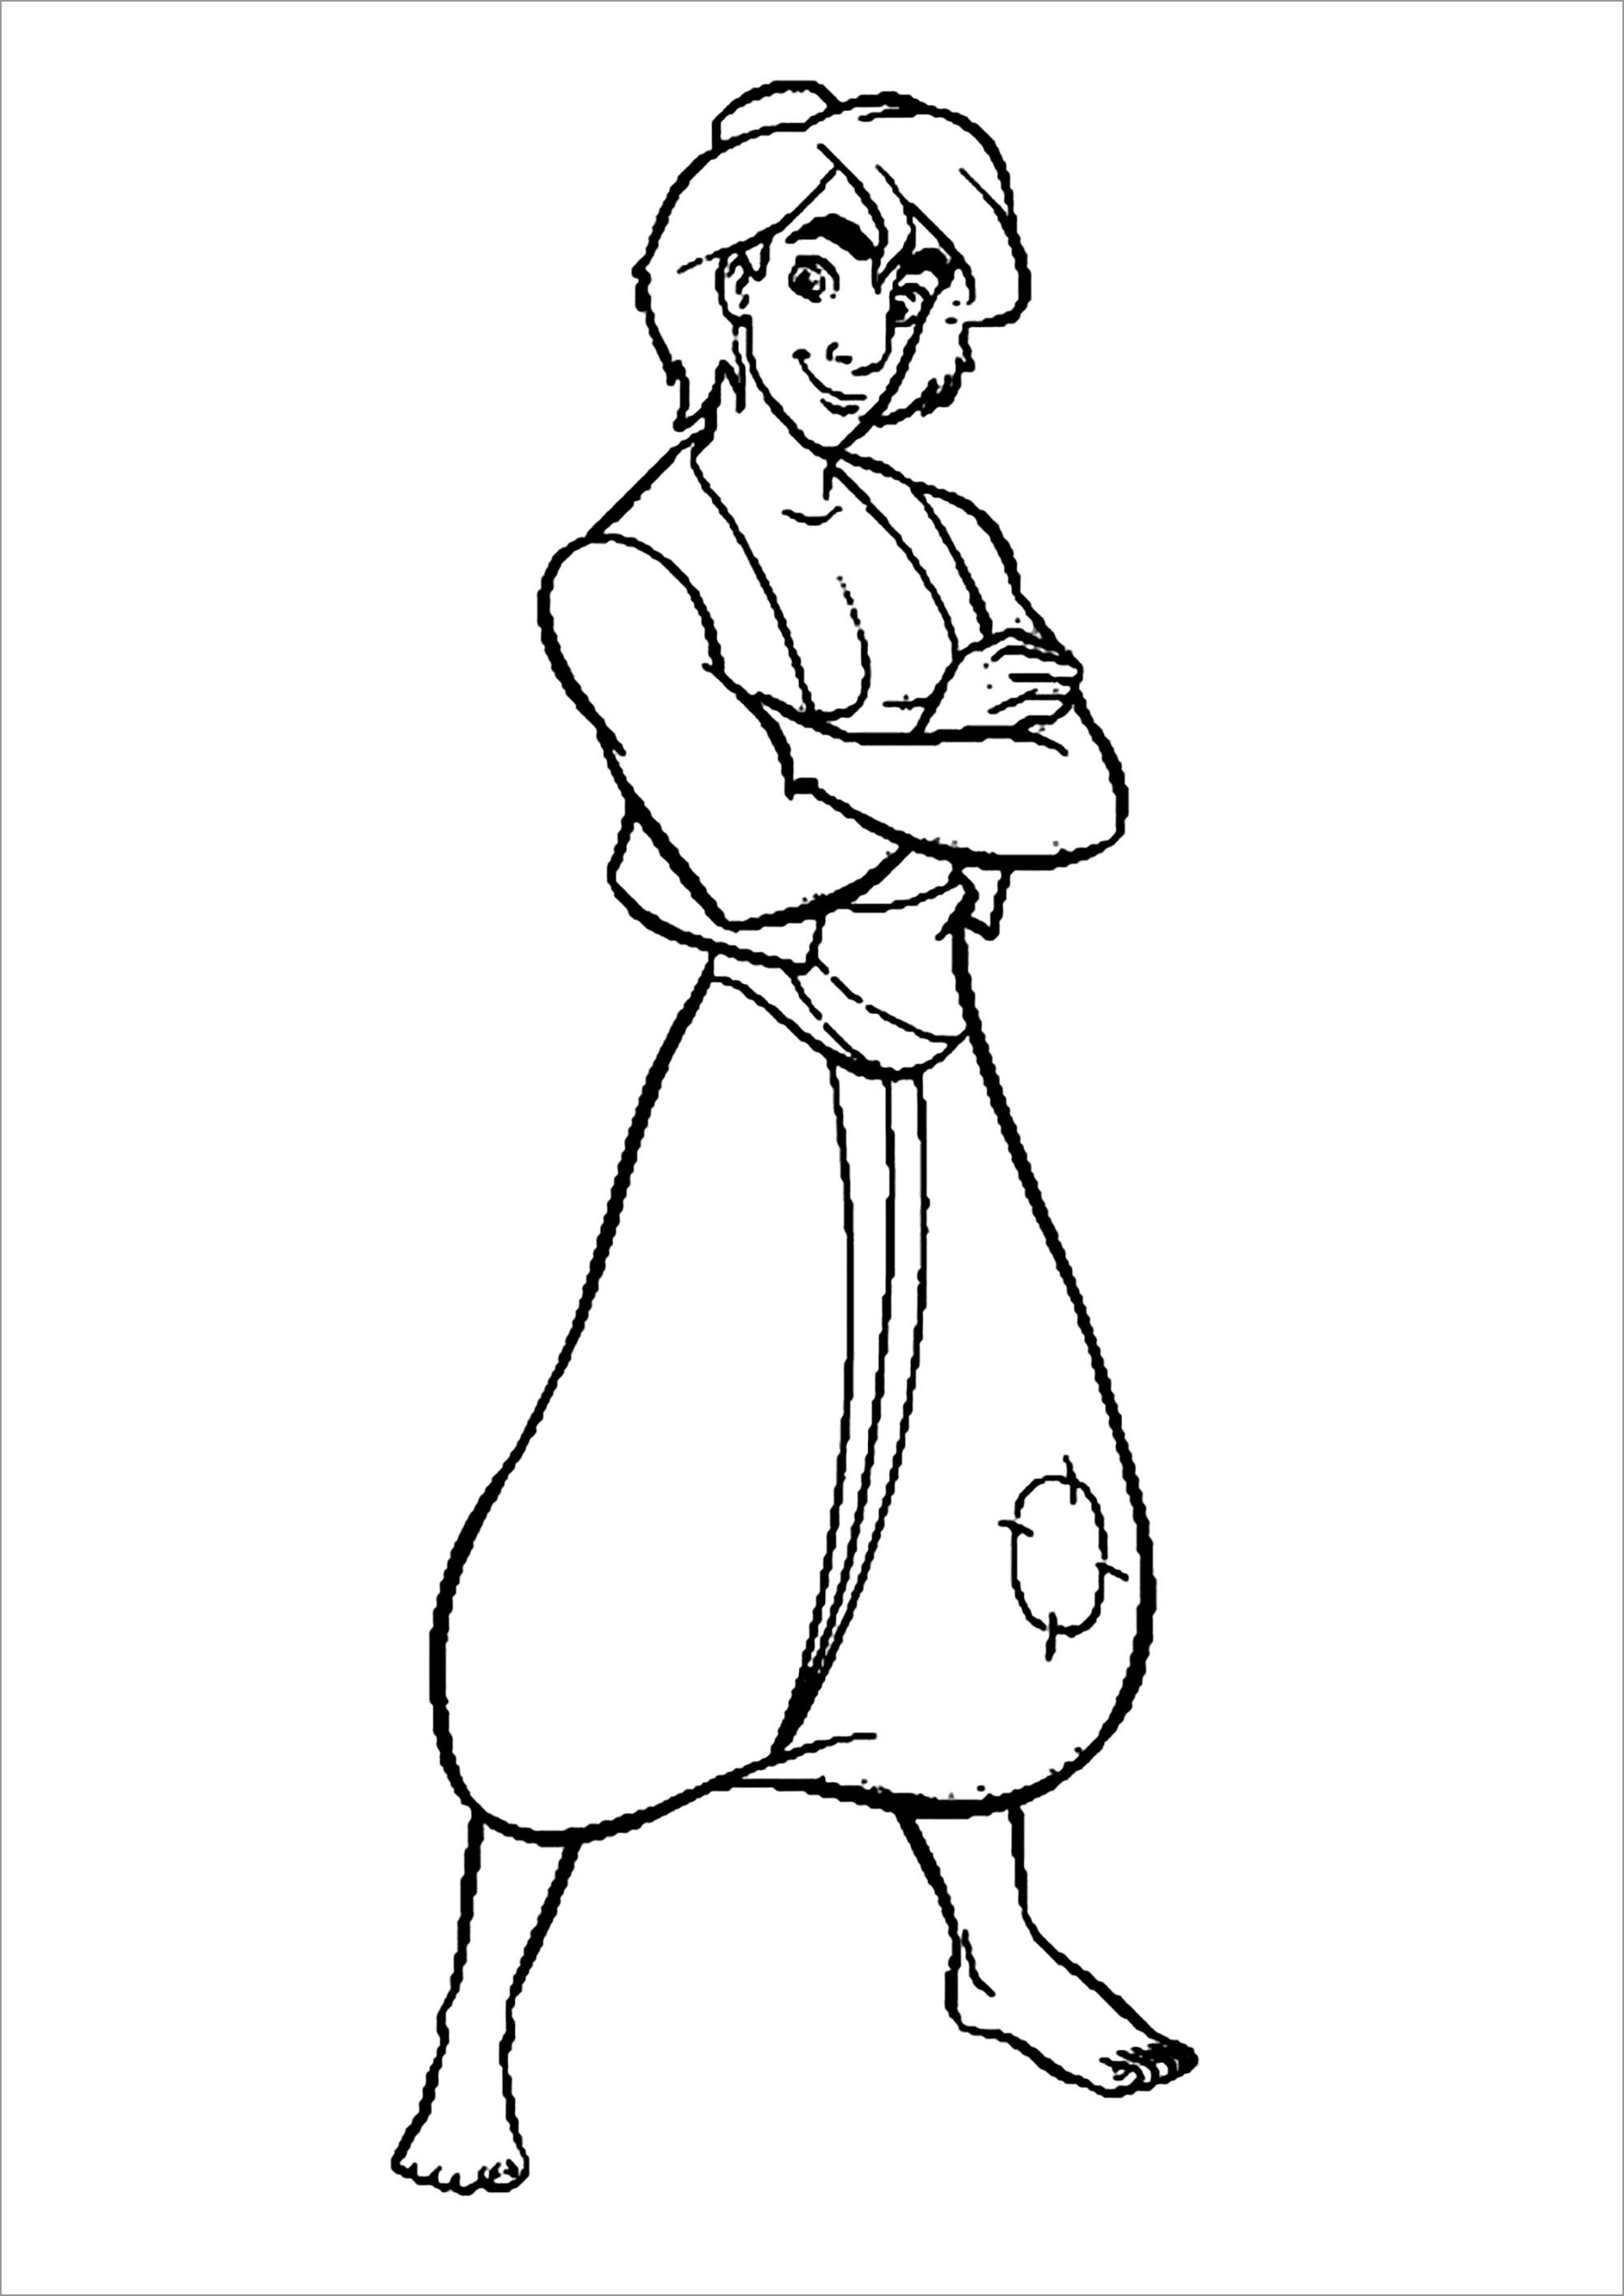 Aladdin Coloring Page for Kids   ColoringBay